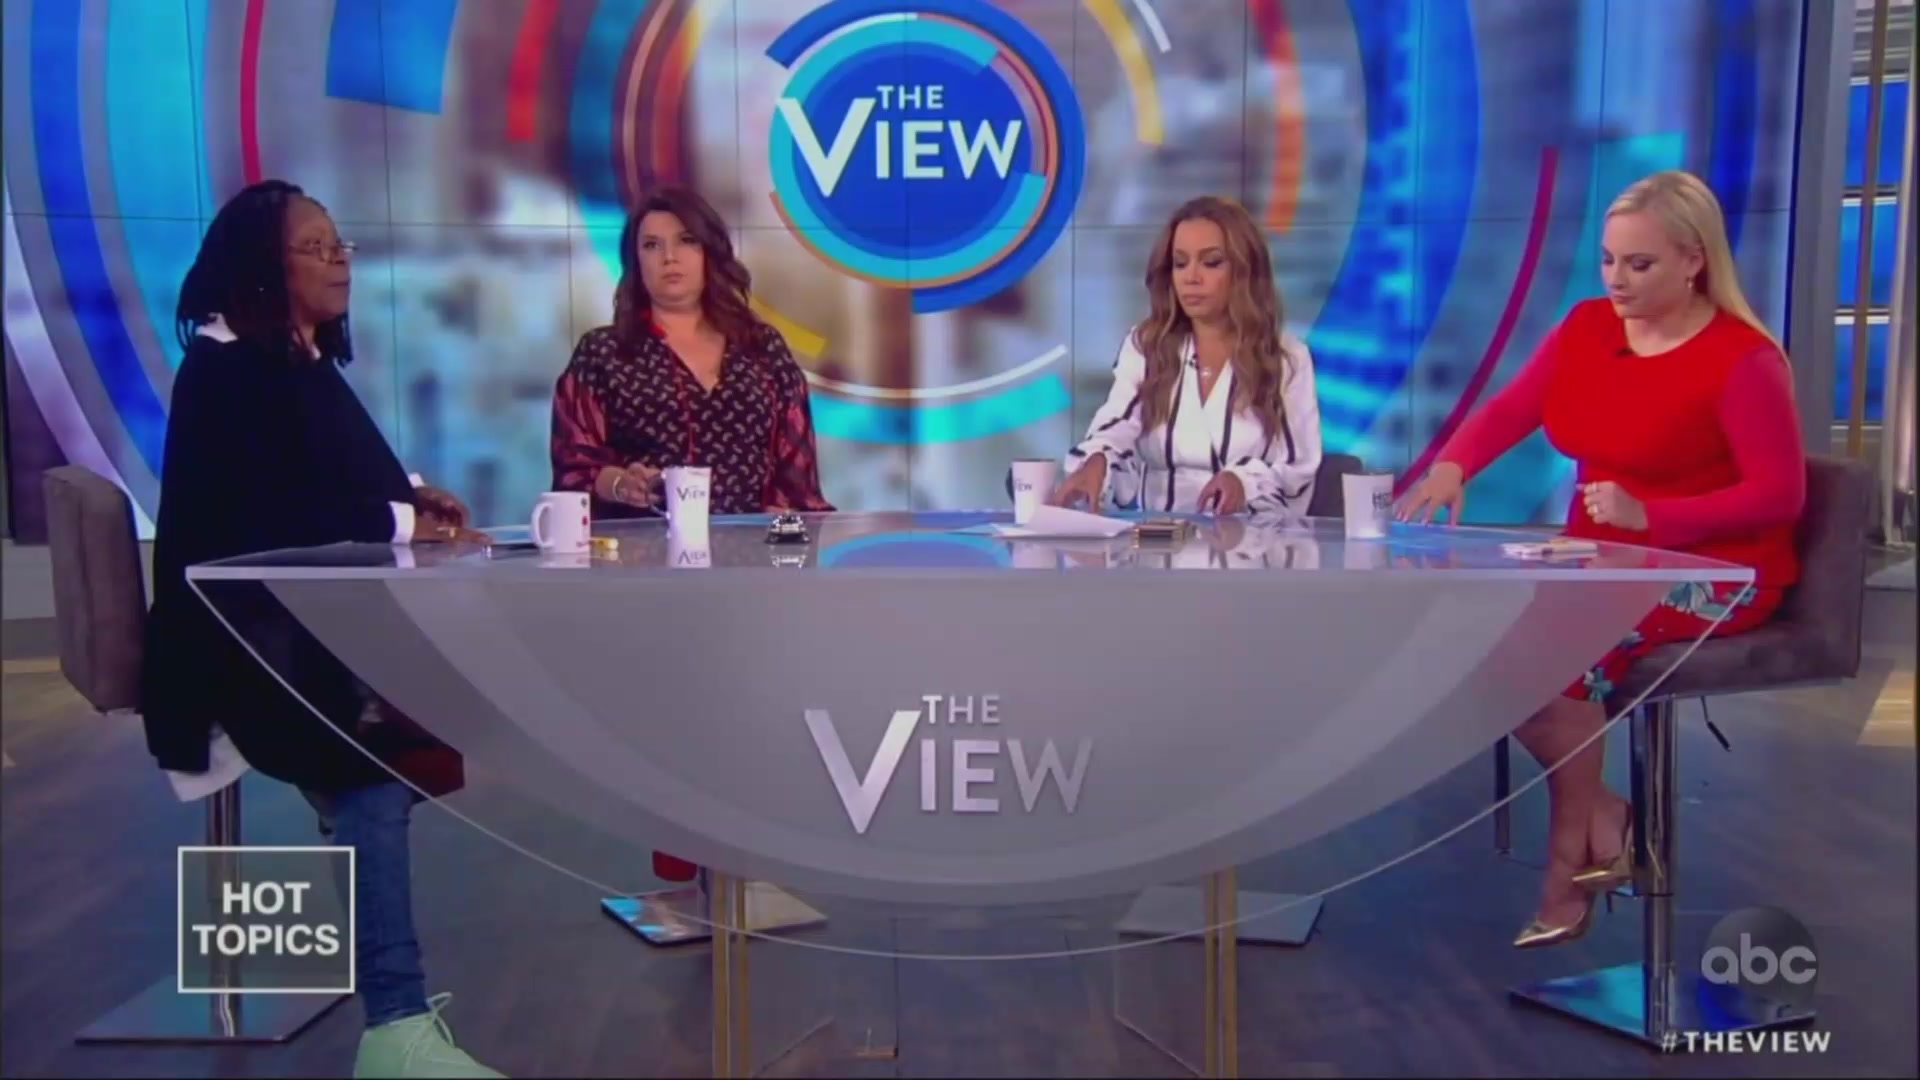 ’I Don’t Get to Talk?!’: Meghan McCain’s Latest Outburst Prompts Scolding From Whoopi Goldberg